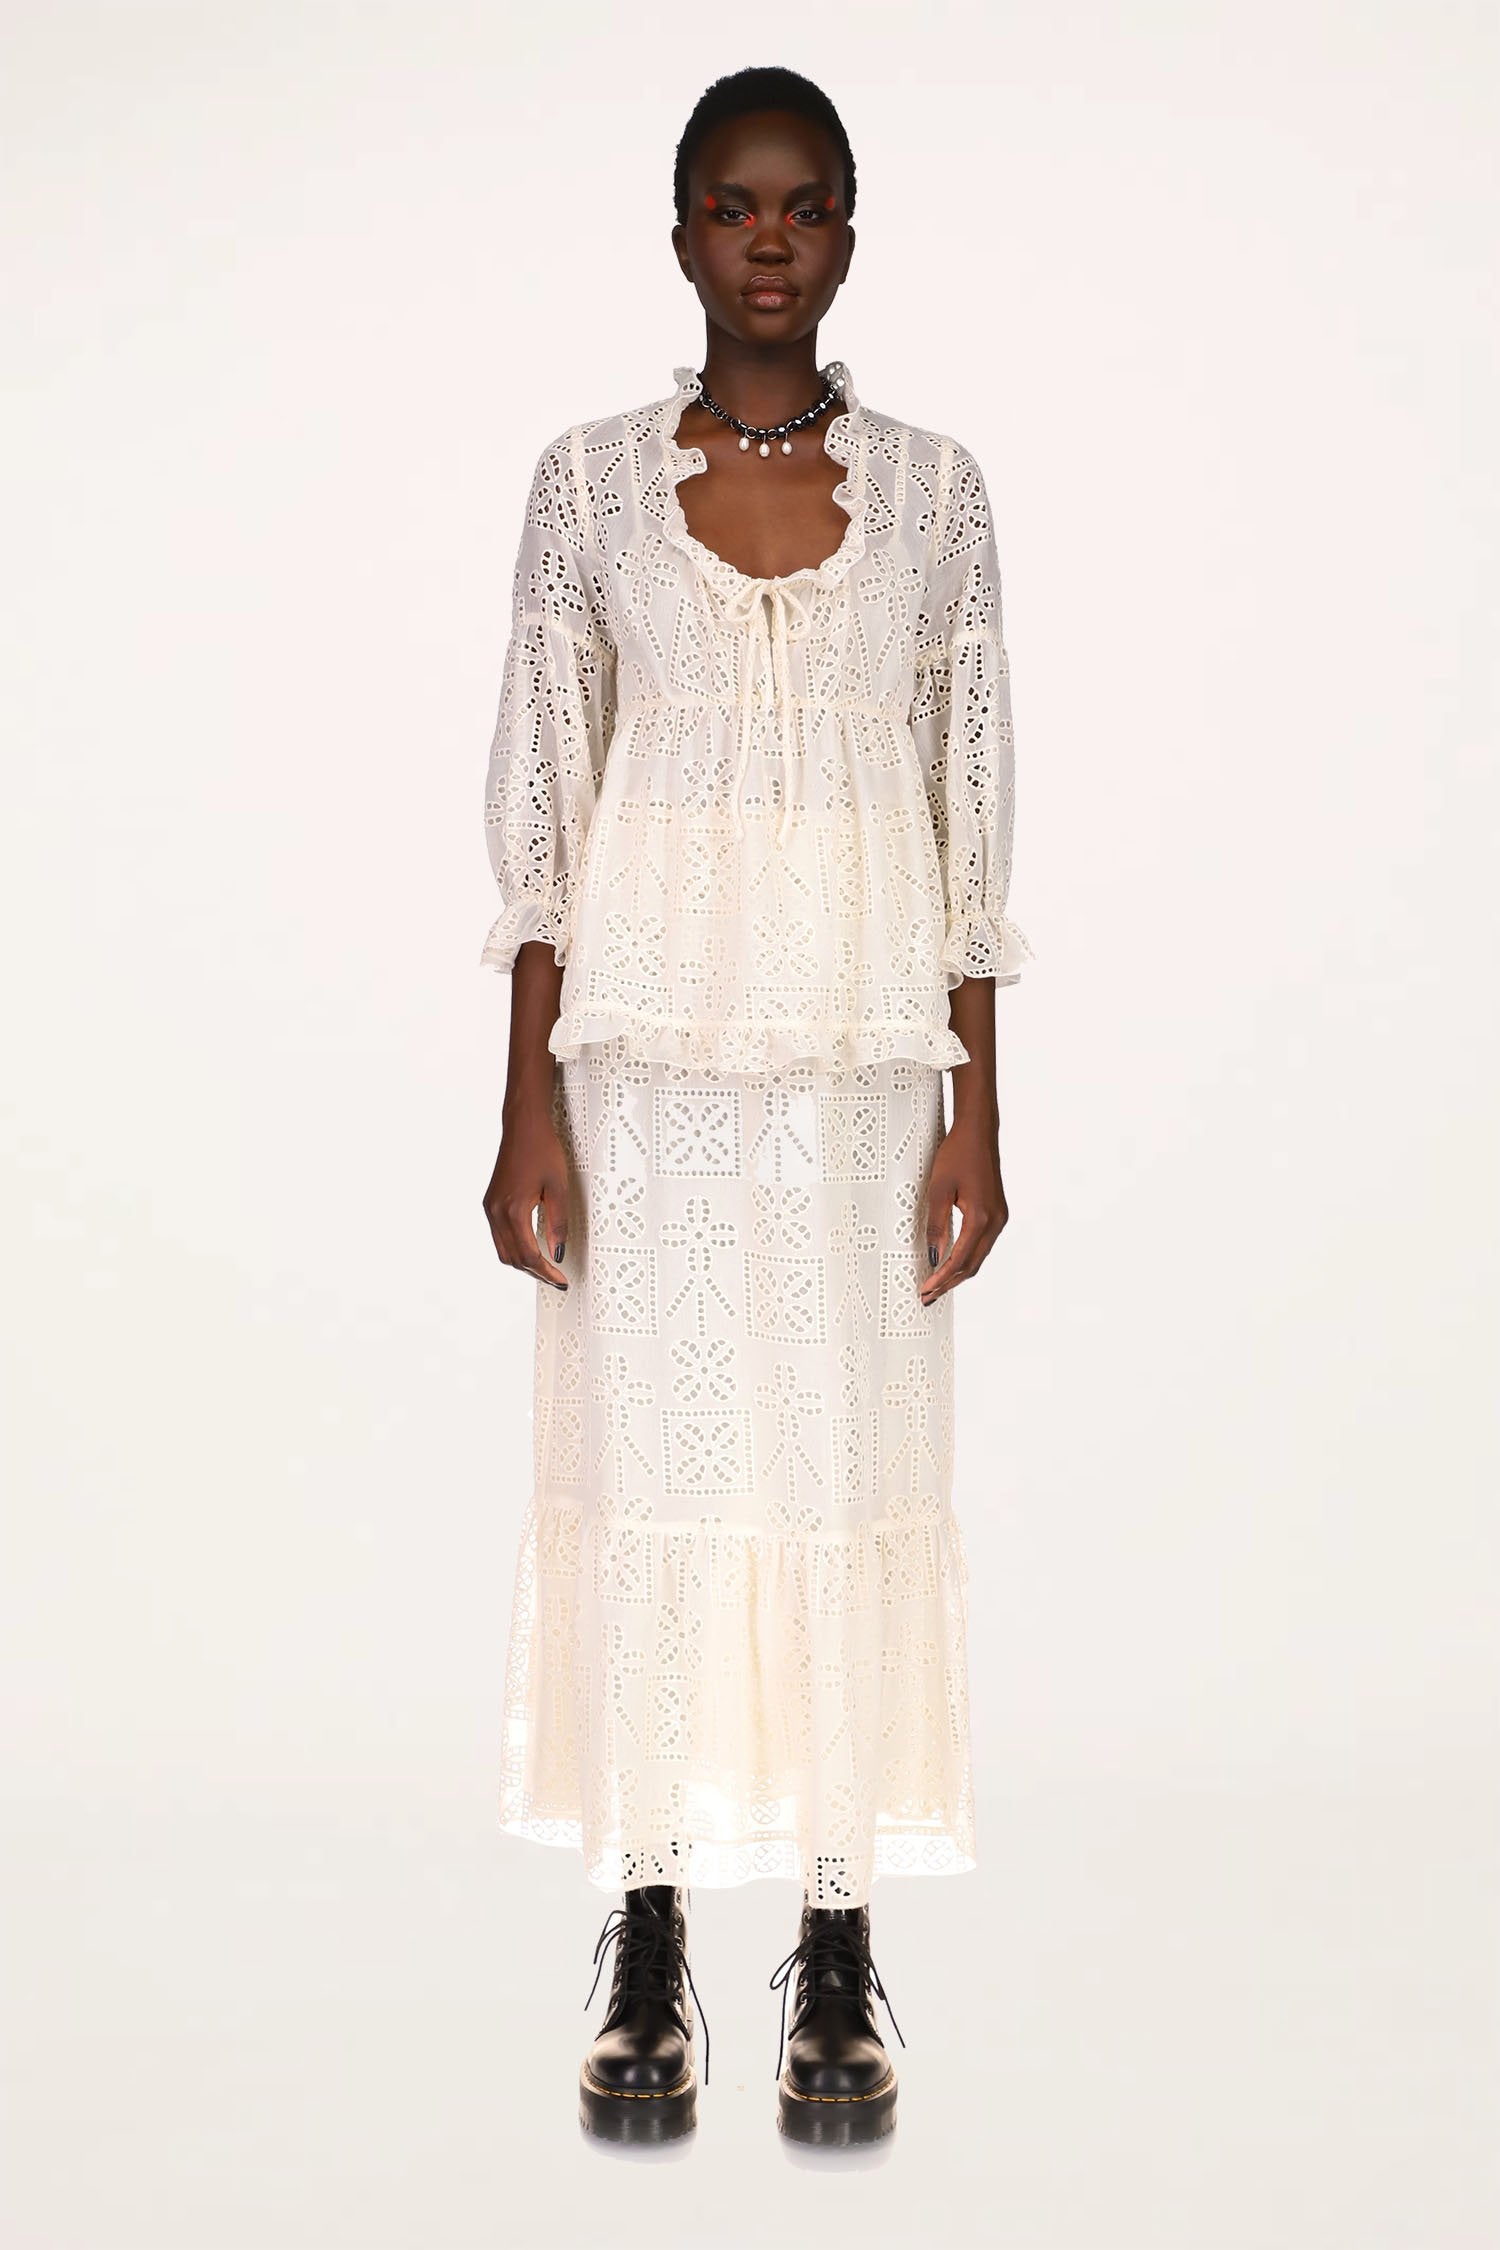 Aesthetic Eyelet Skirt Cream nicely pair with Aesthetic Eyelet Top Cream